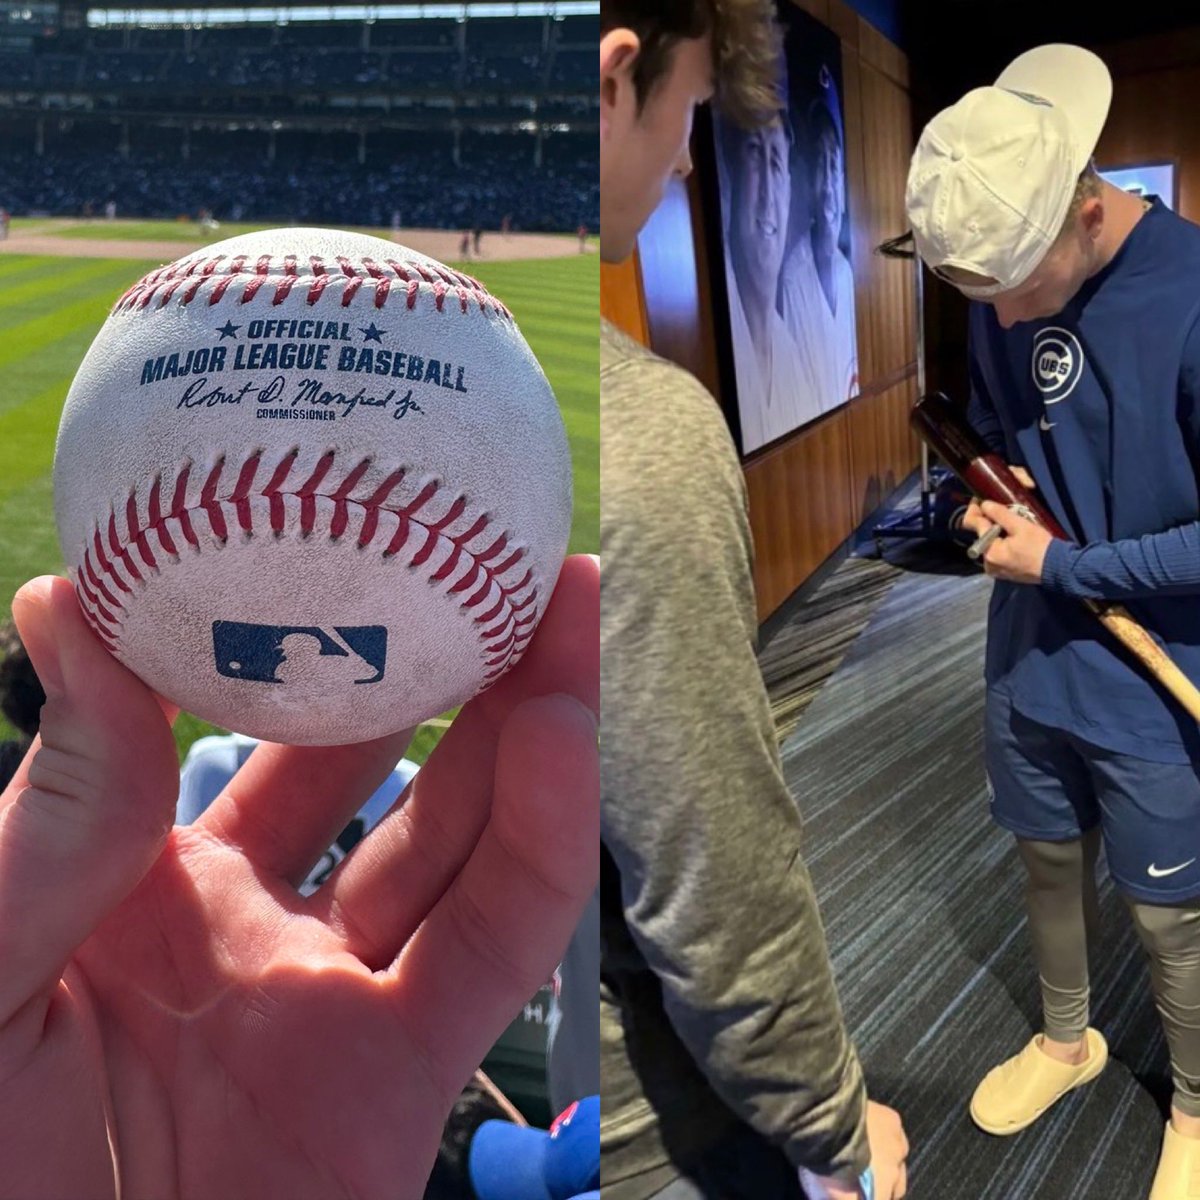 The fan who caught Pete Crow-Armstrong’s first MLB hit/HR received the bat he used (signed) in exchange for the ball. (📸: @CadenGreco)